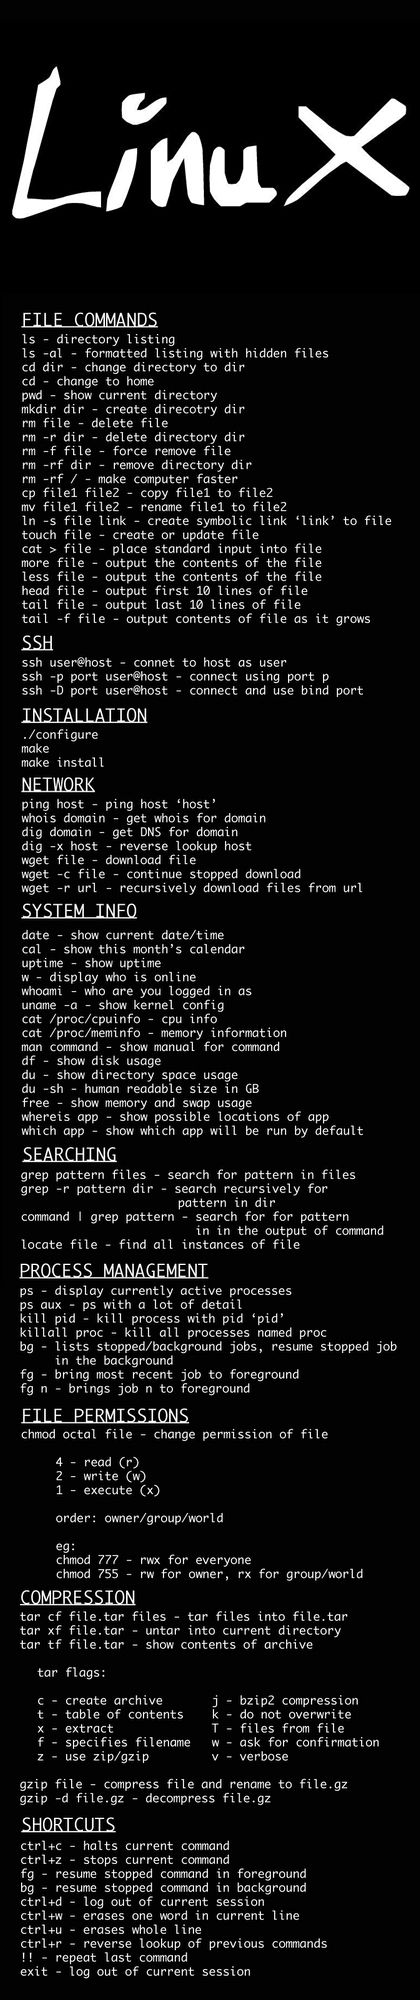 Computer Science, Programming Languages, Linux | Basic Linux commands cheat sheet, the poster I've always dreamed! Shortcut for terminal: Ctrl+Alt+T #technology #linux